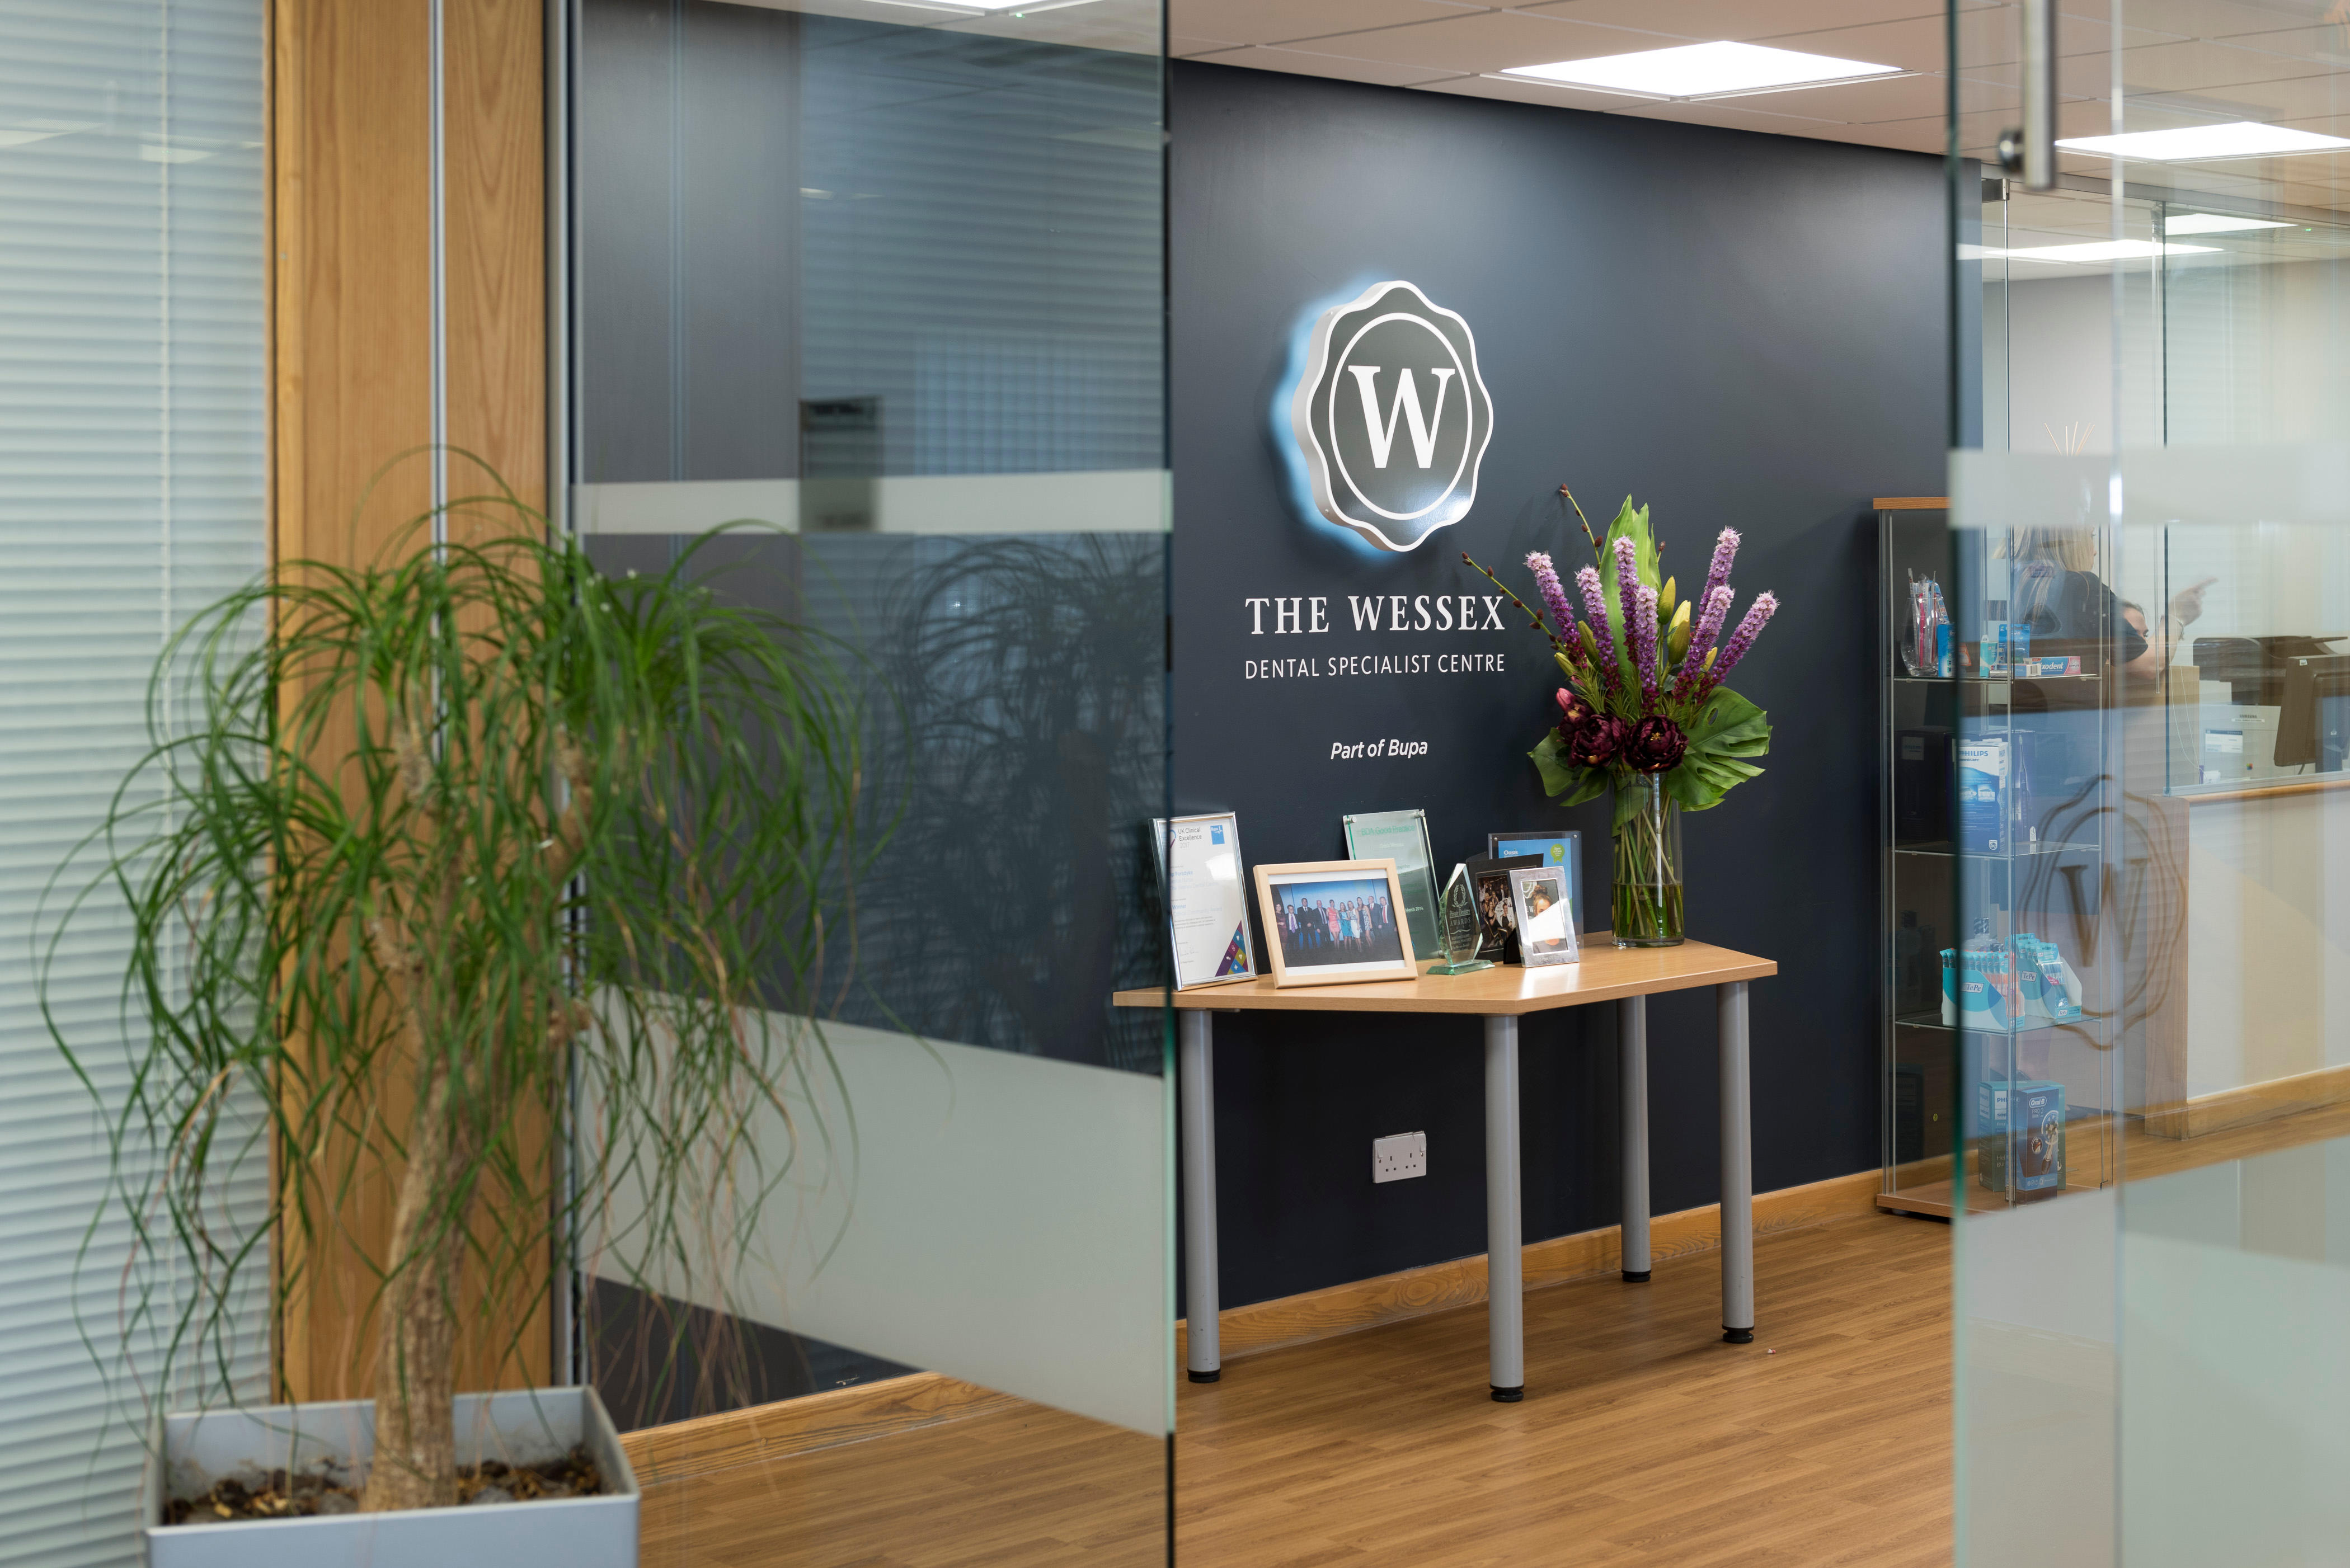 The Wessex Dental Specialist Centre The Wessex Dental Specialist Centre Fareham 01329 226470